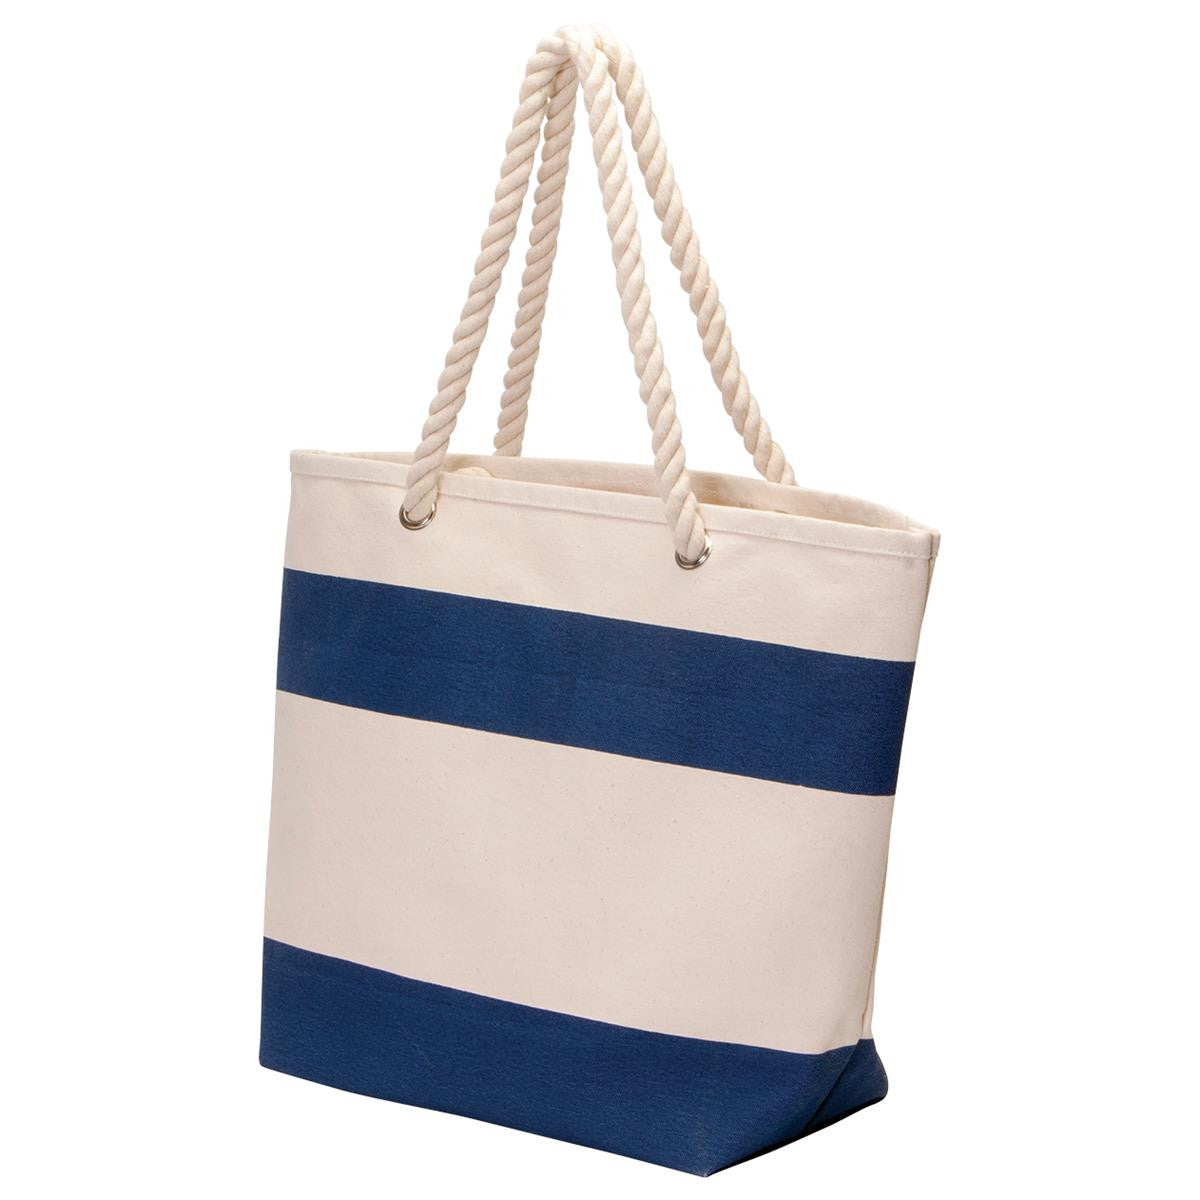 Legend Life-2001 Soho Cotton Canvas Tote (Pack of 10)